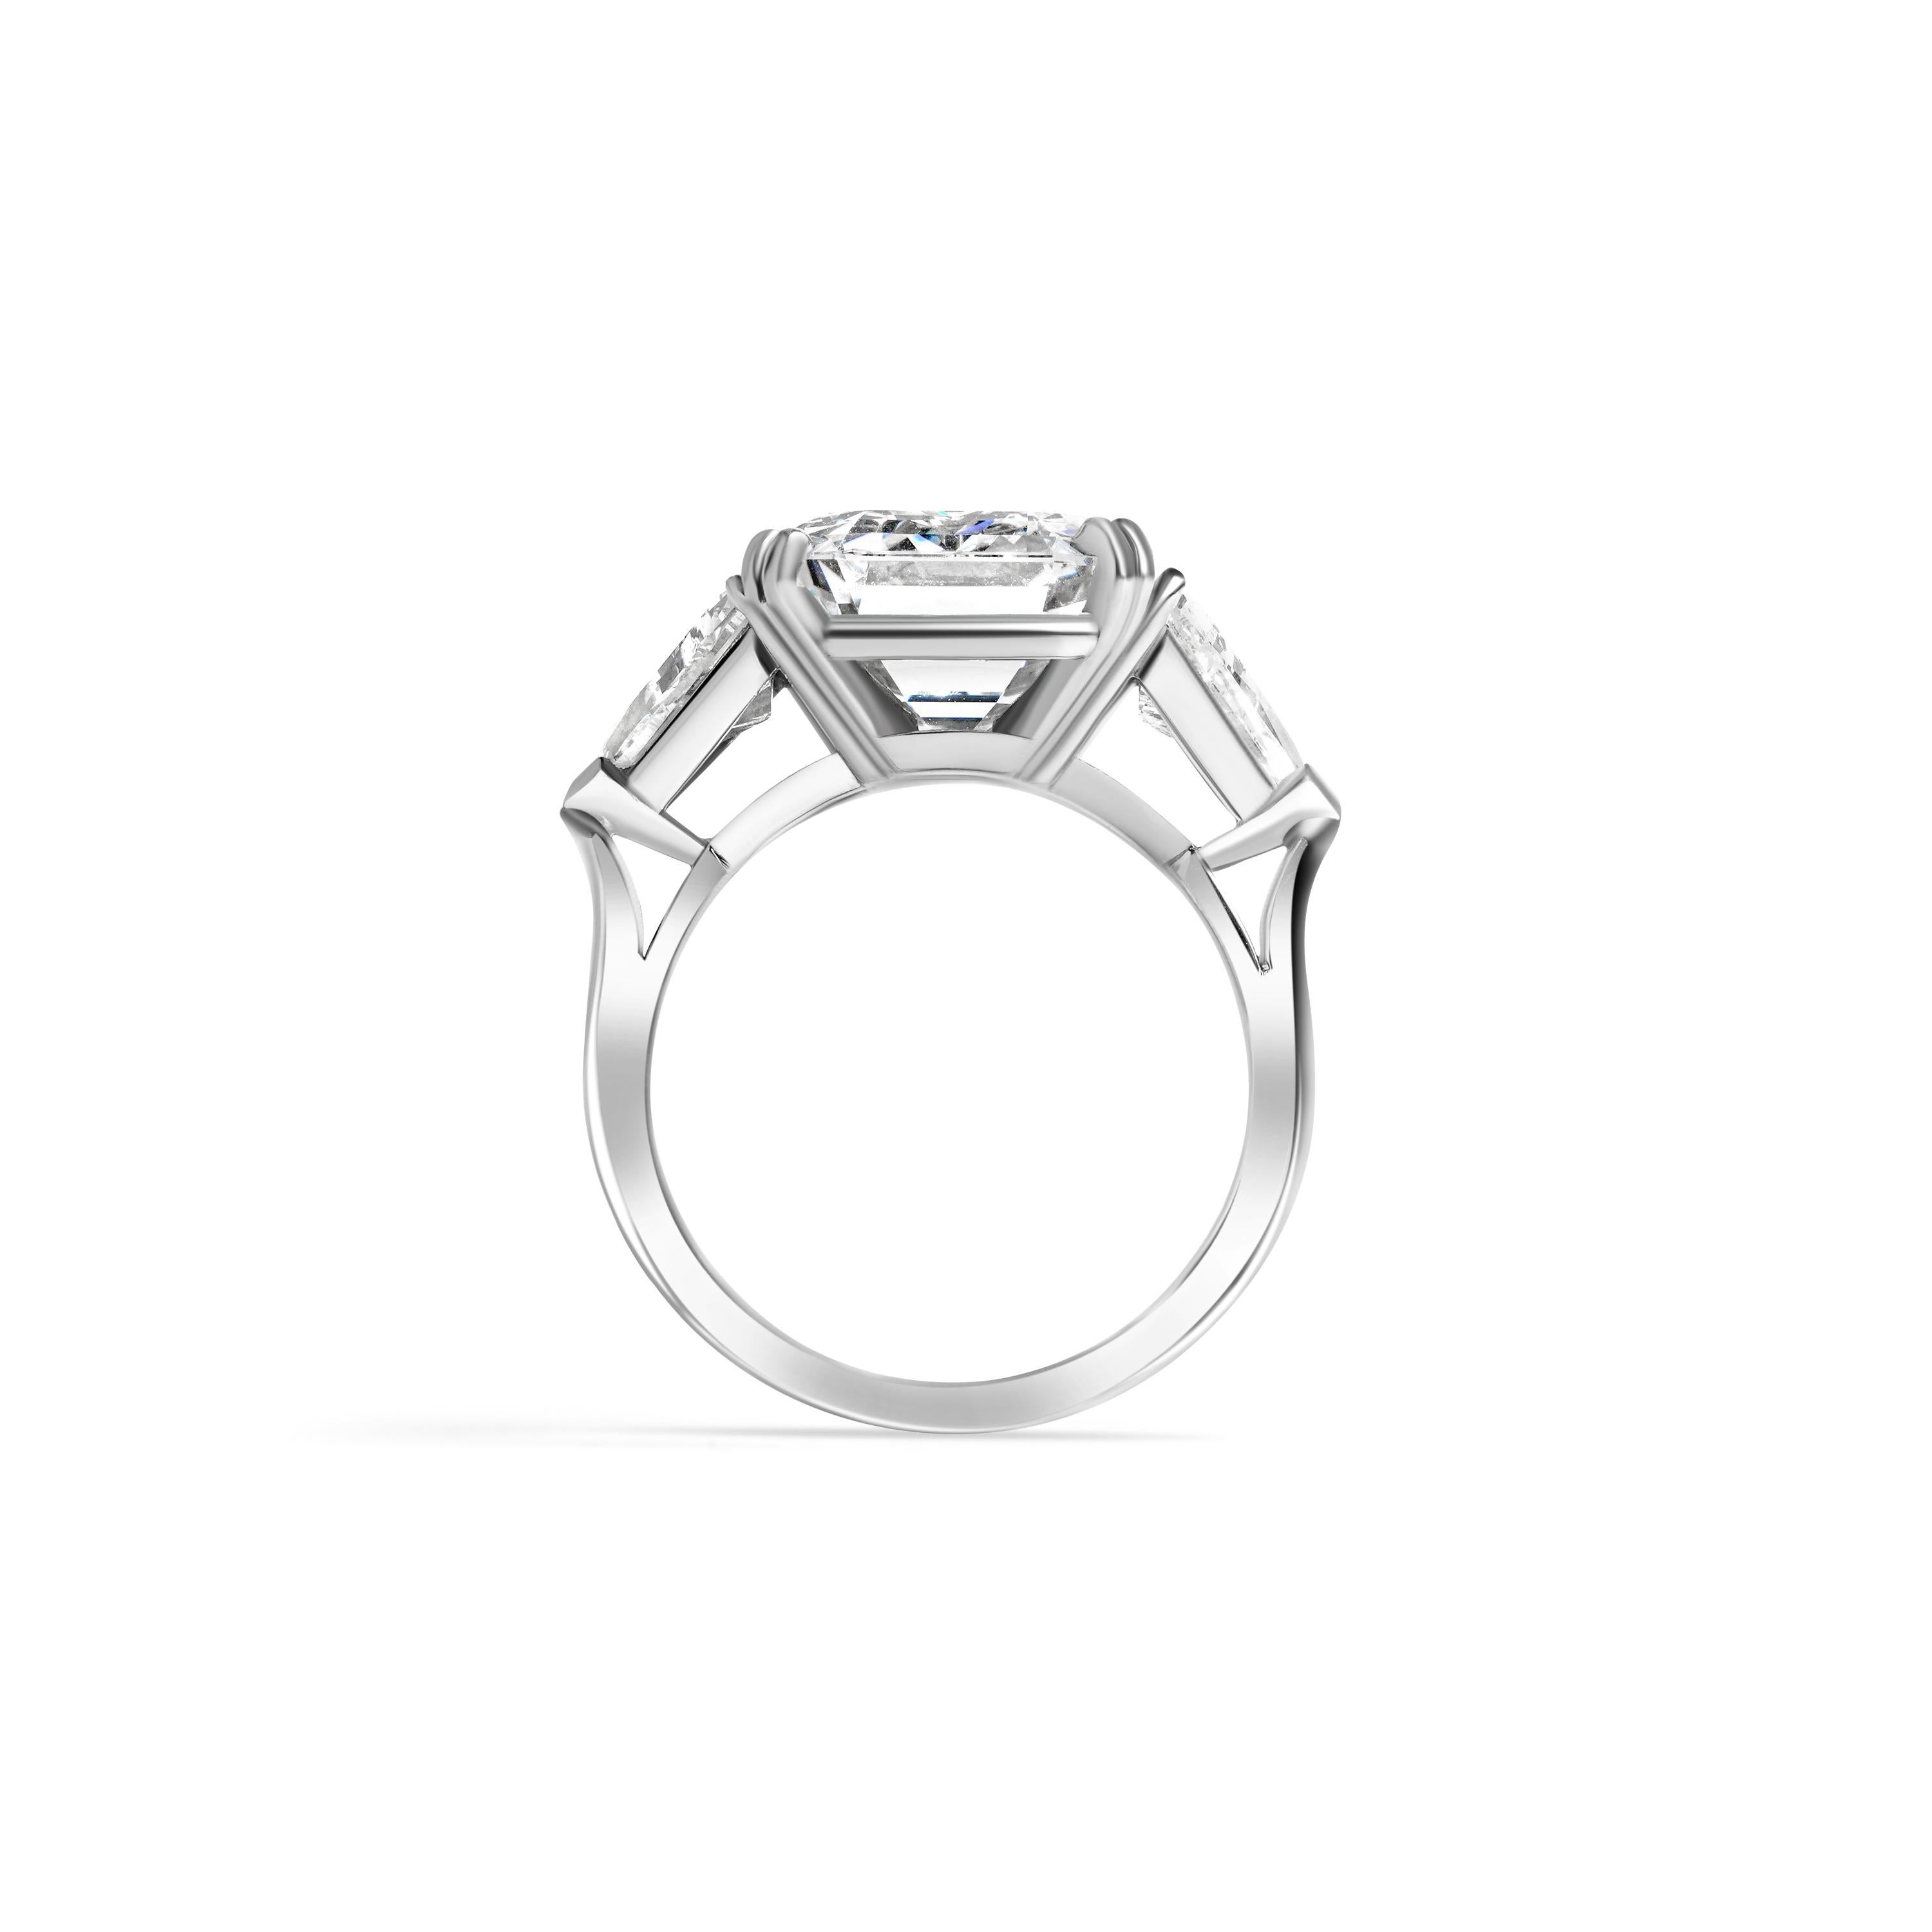 If you are looking for a showstopper this ring is it. Crafted in Platinum Featuring one 10.05 carat Emerald Cut diamond with an E color and VVS2 clarity. The diamond comes with a GIA certified report #5221334024. Flanking the center stone are (2)